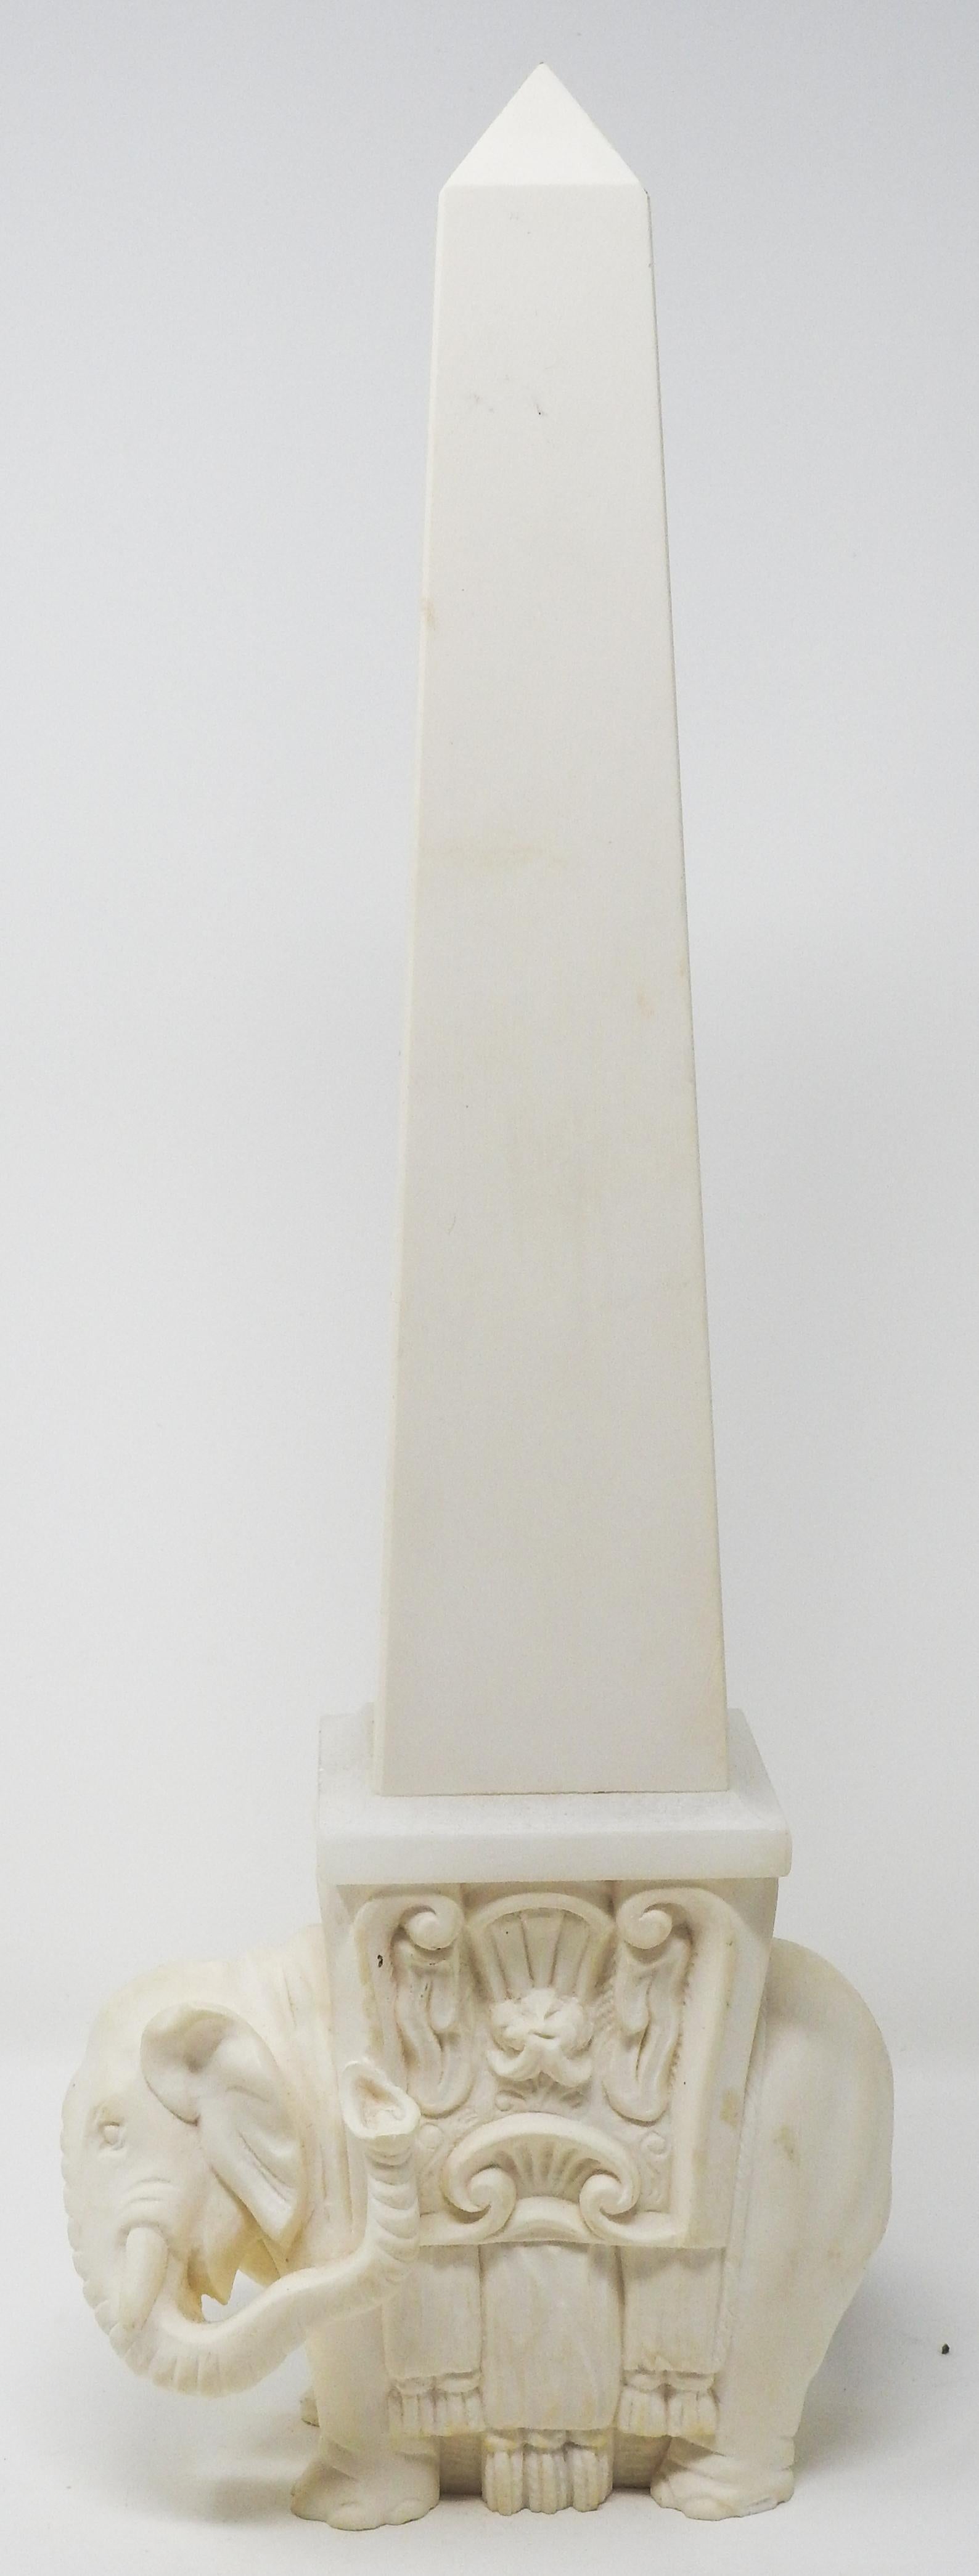 Offering this white ceramic and glass elephant obelisk. The base of this obelisk is a ceramic cast elephant that is draped with fabric and a saddle. The piece between the elephant and the top is a frosted glass piece and the top is ceramic.